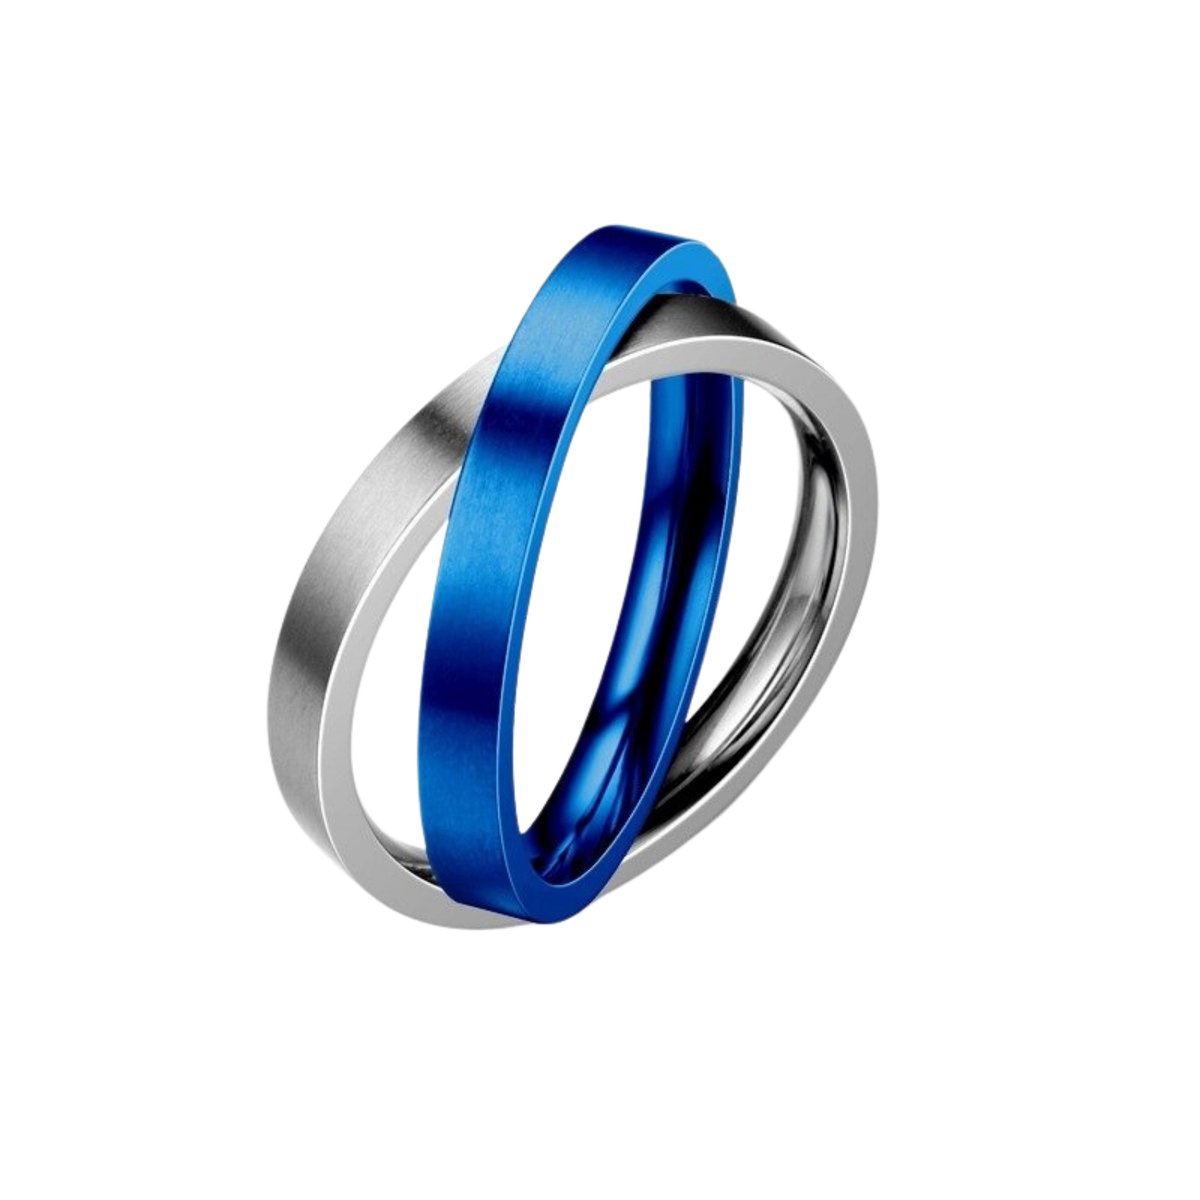 Anxiety Ring - (2 ringen) - Stress Ring - Fidget Ring - Anxiety Ring For Finger - Draaibare Ring - Spinning Ring - Zilver-Blauw - (16.25 mm / maat 51)